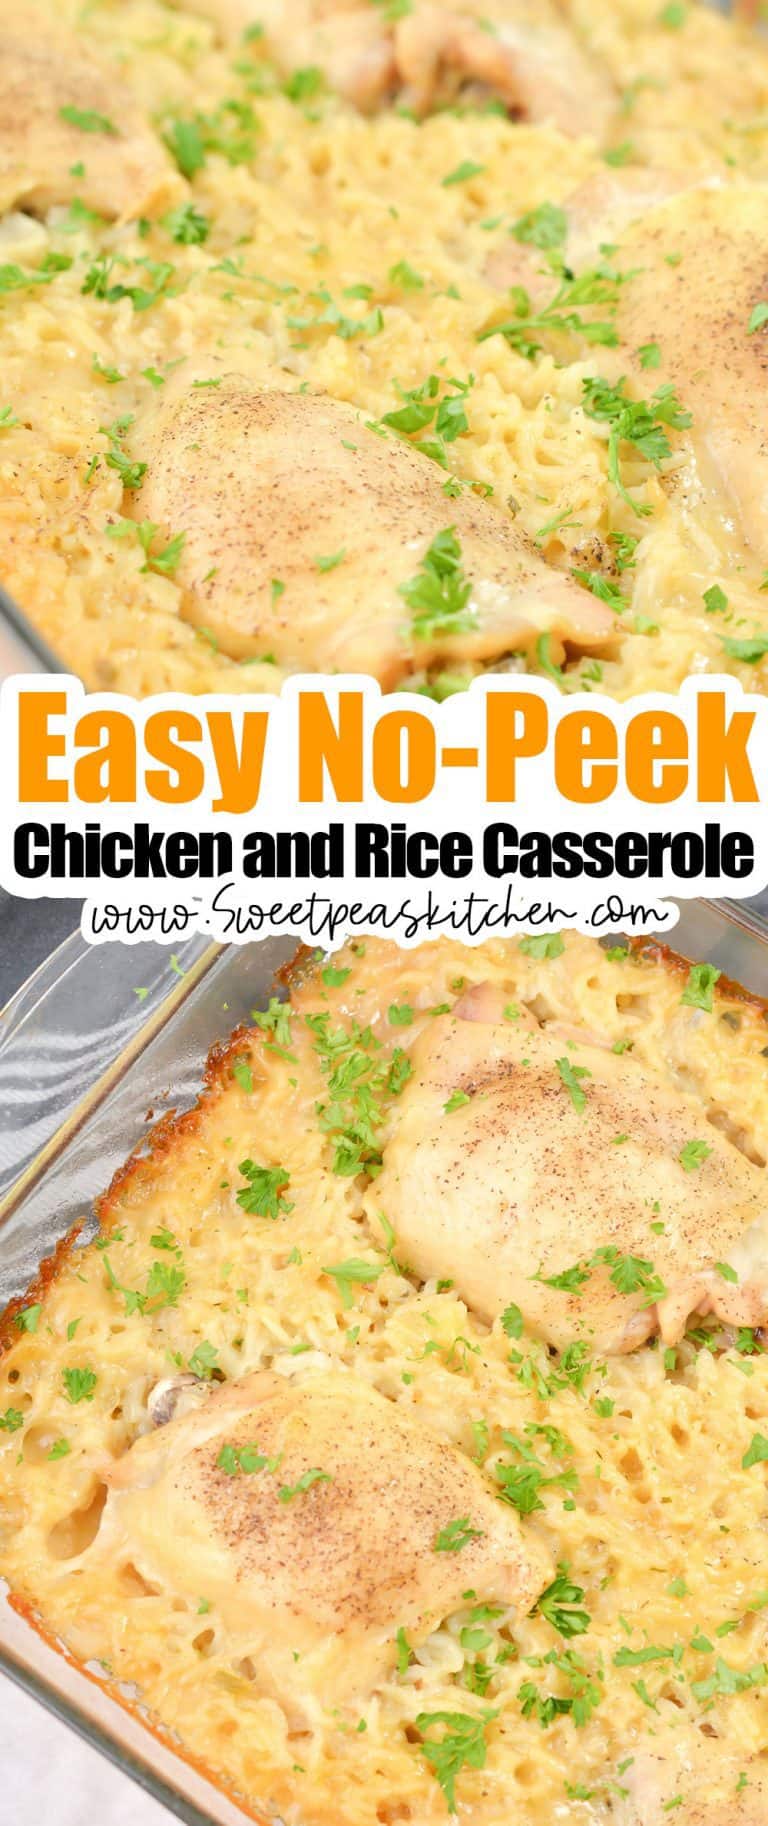 Easy No-Peek Chicken and Rice Casserole - Sweet Pea's Kitchen